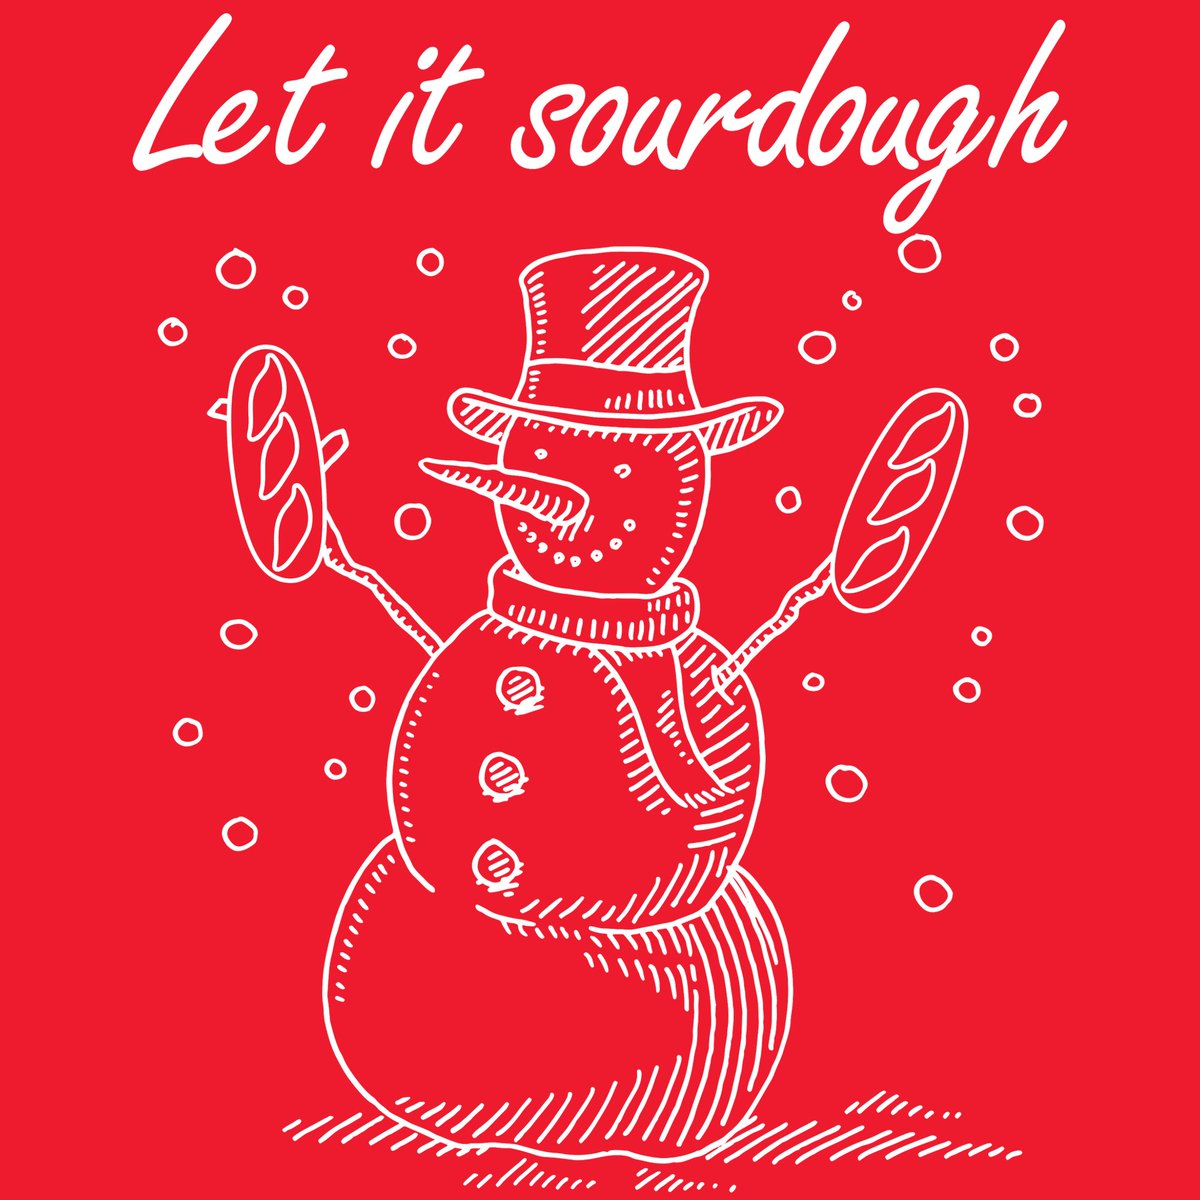 Sending warm wishes and sourdough hugs. Happy Holidays from Boudin.